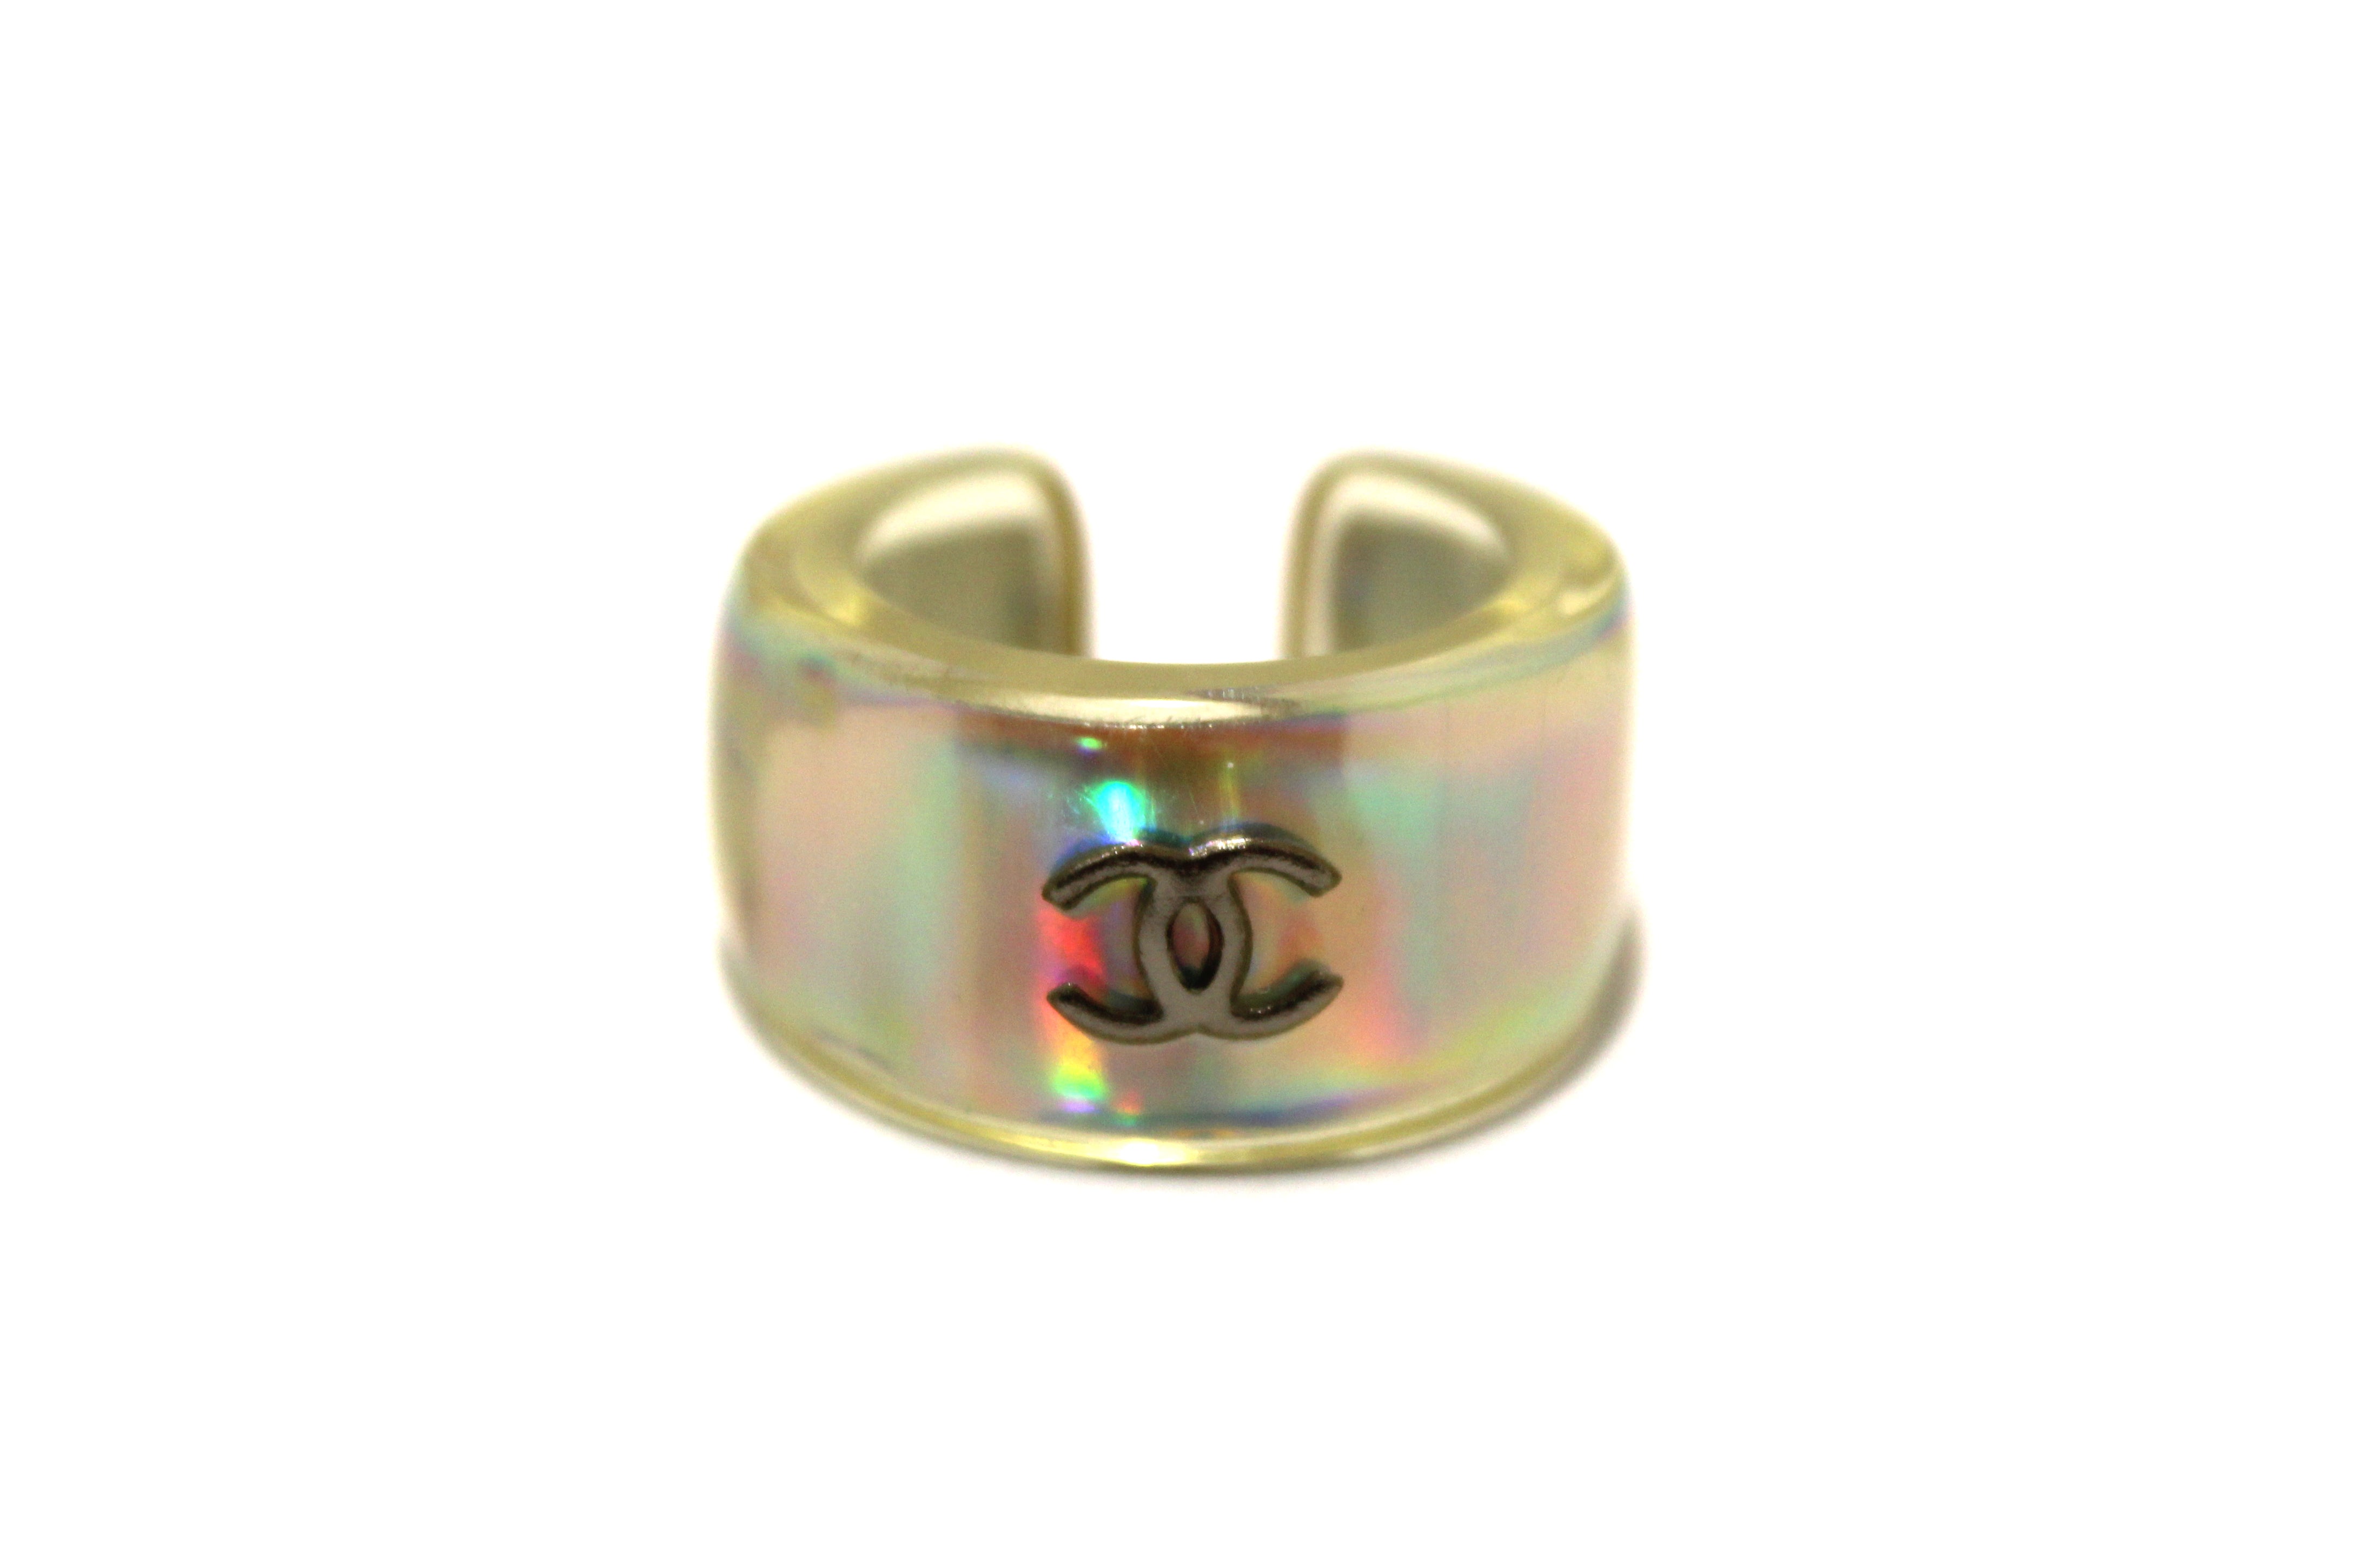 Authentic Vintage Chanel Hologram Silver CC Acrylic Open Ring Size 7